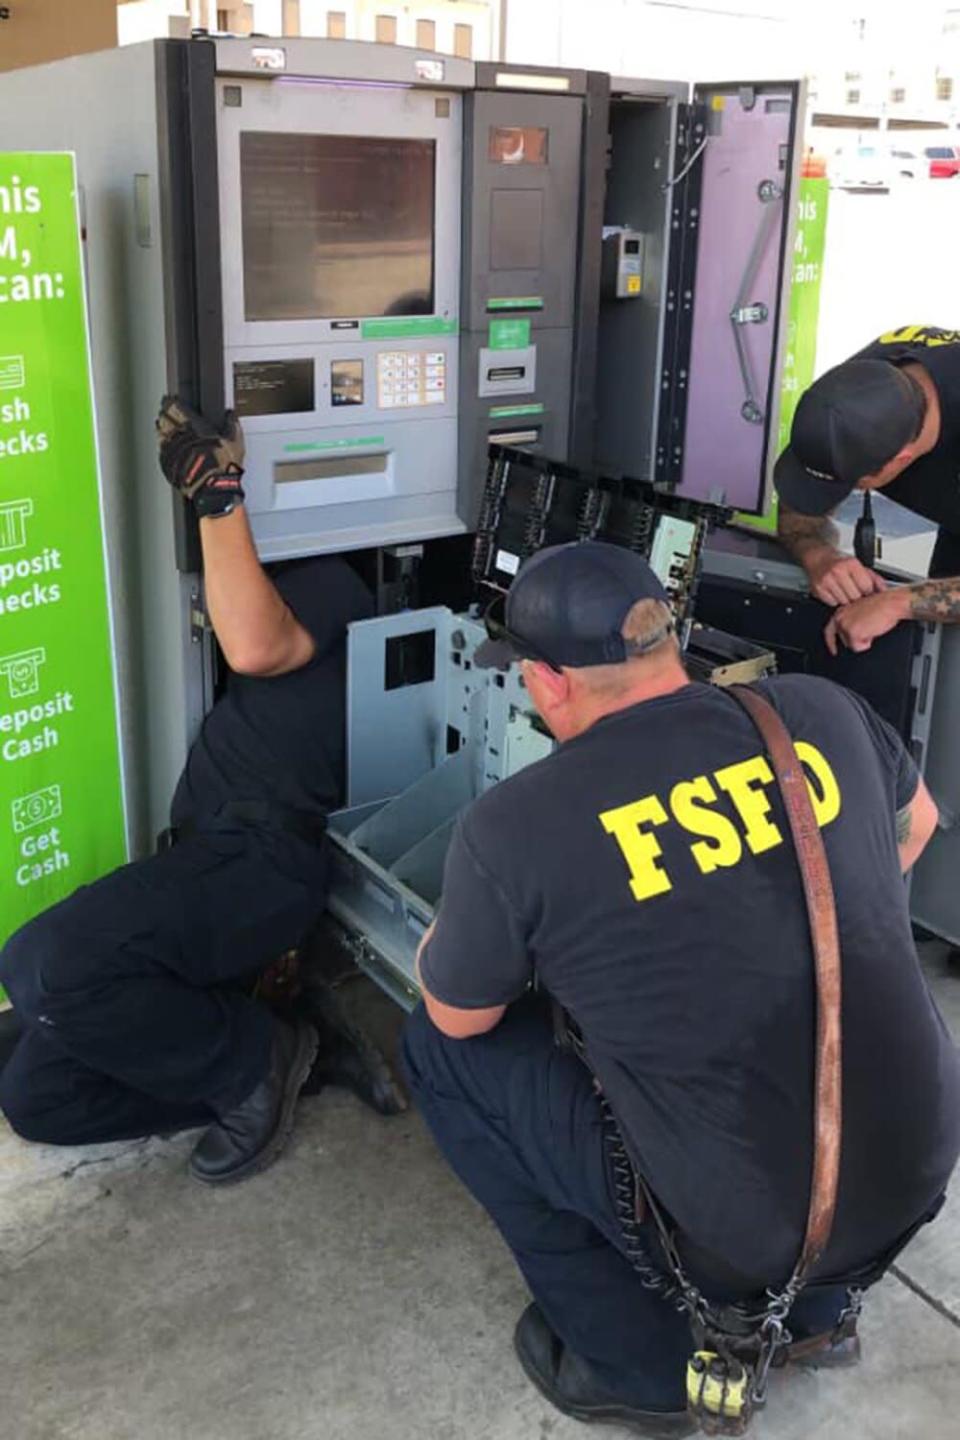 Arkansas Firefighters Rescue Cat From ATM, Name Him Cash